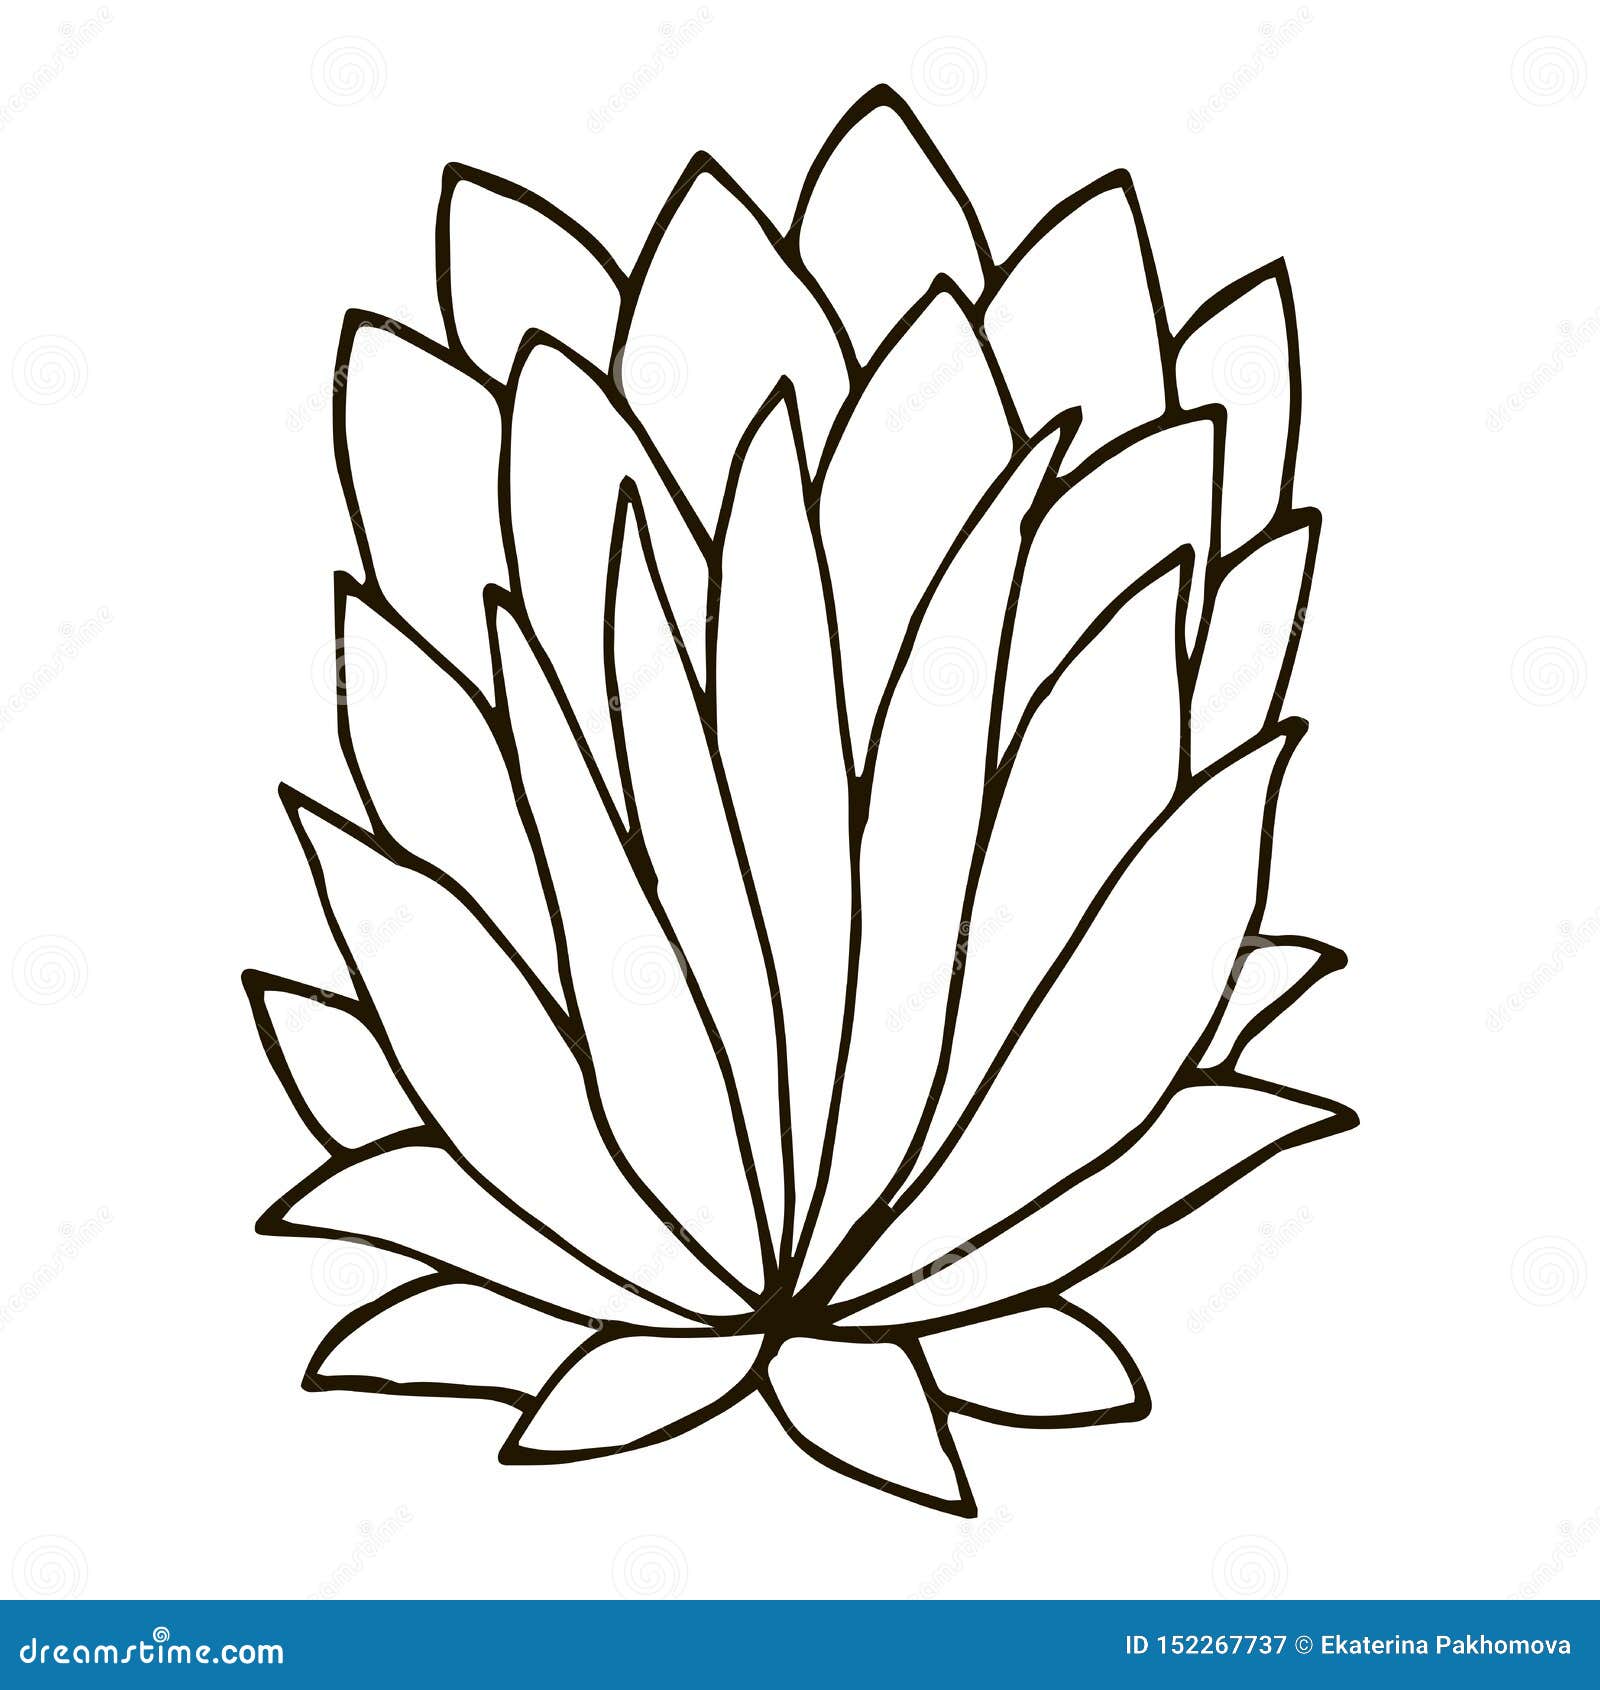 Hand Drawn Doodle Bush Isolated on White Background for Coloring Book